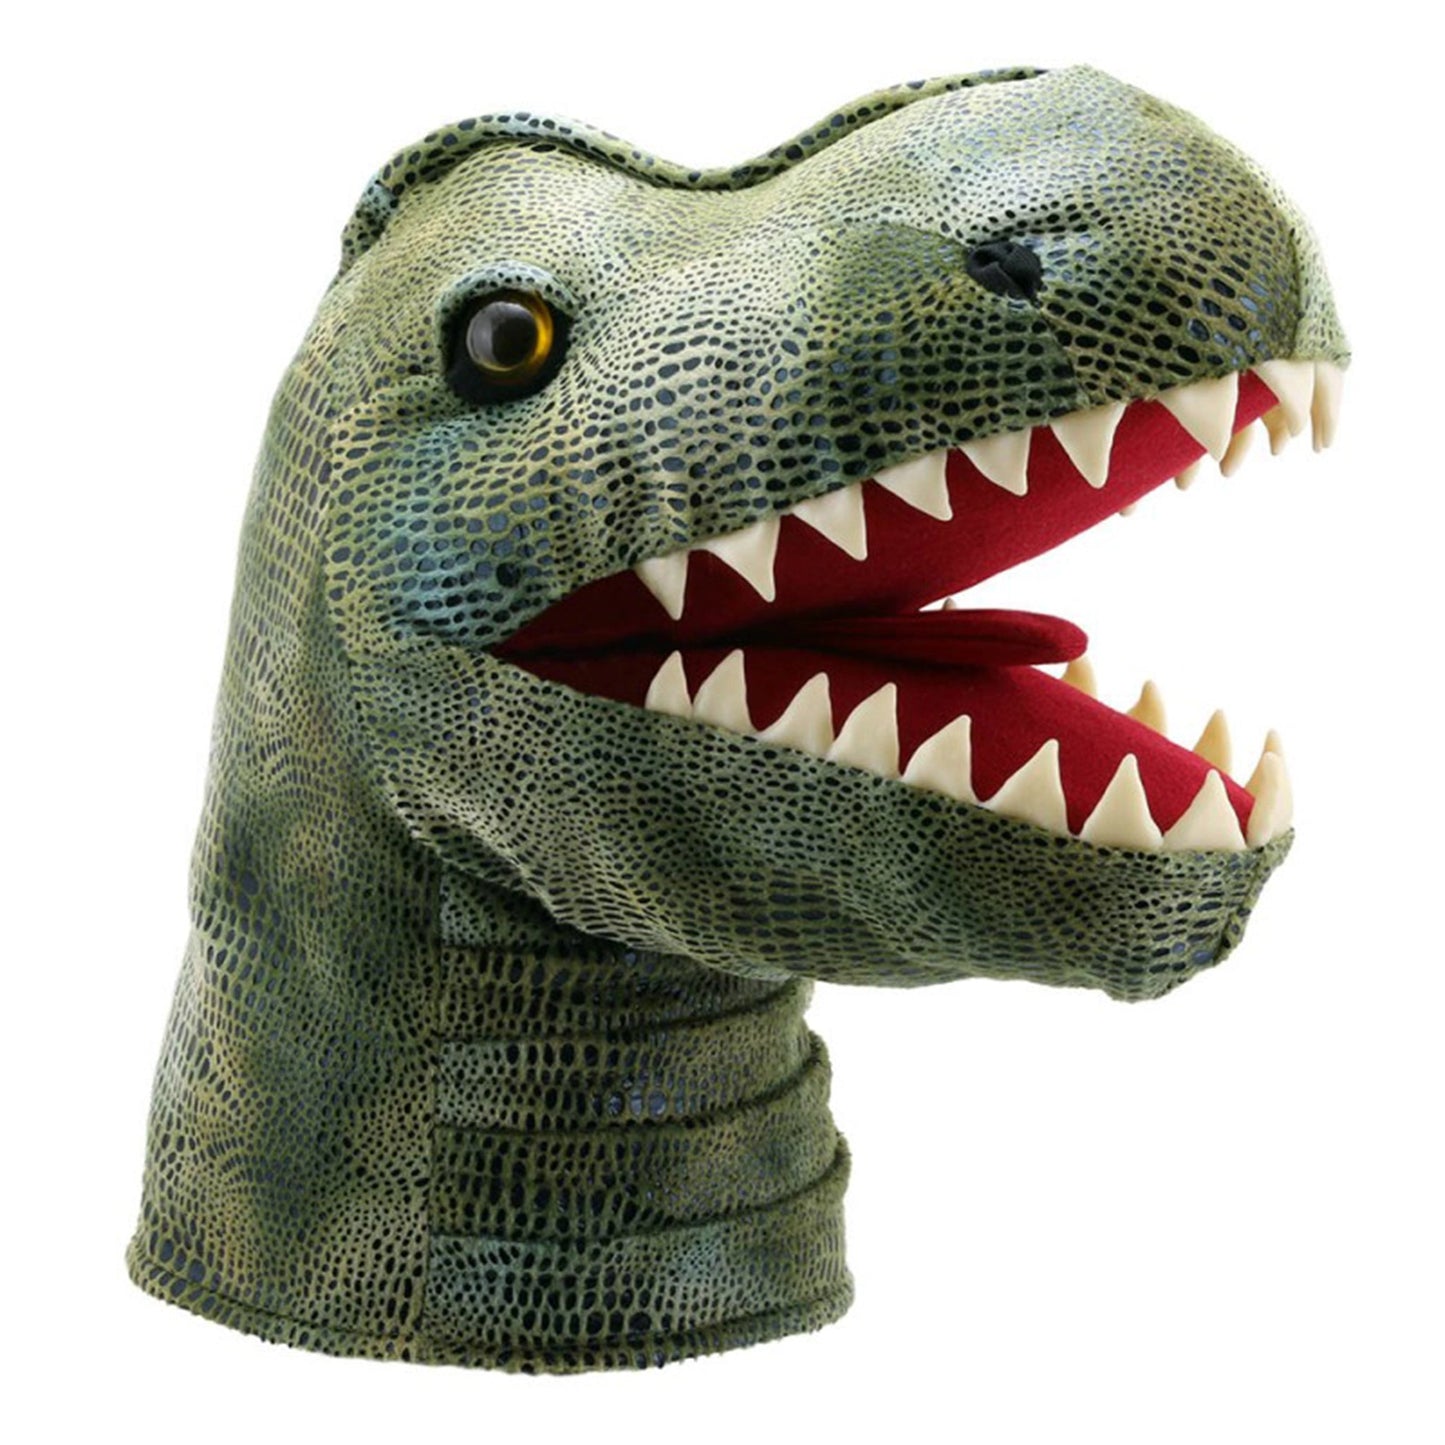 Large T-Rex Dino Head Puppet - The Puppet Company - The Forgotten Toy Shop